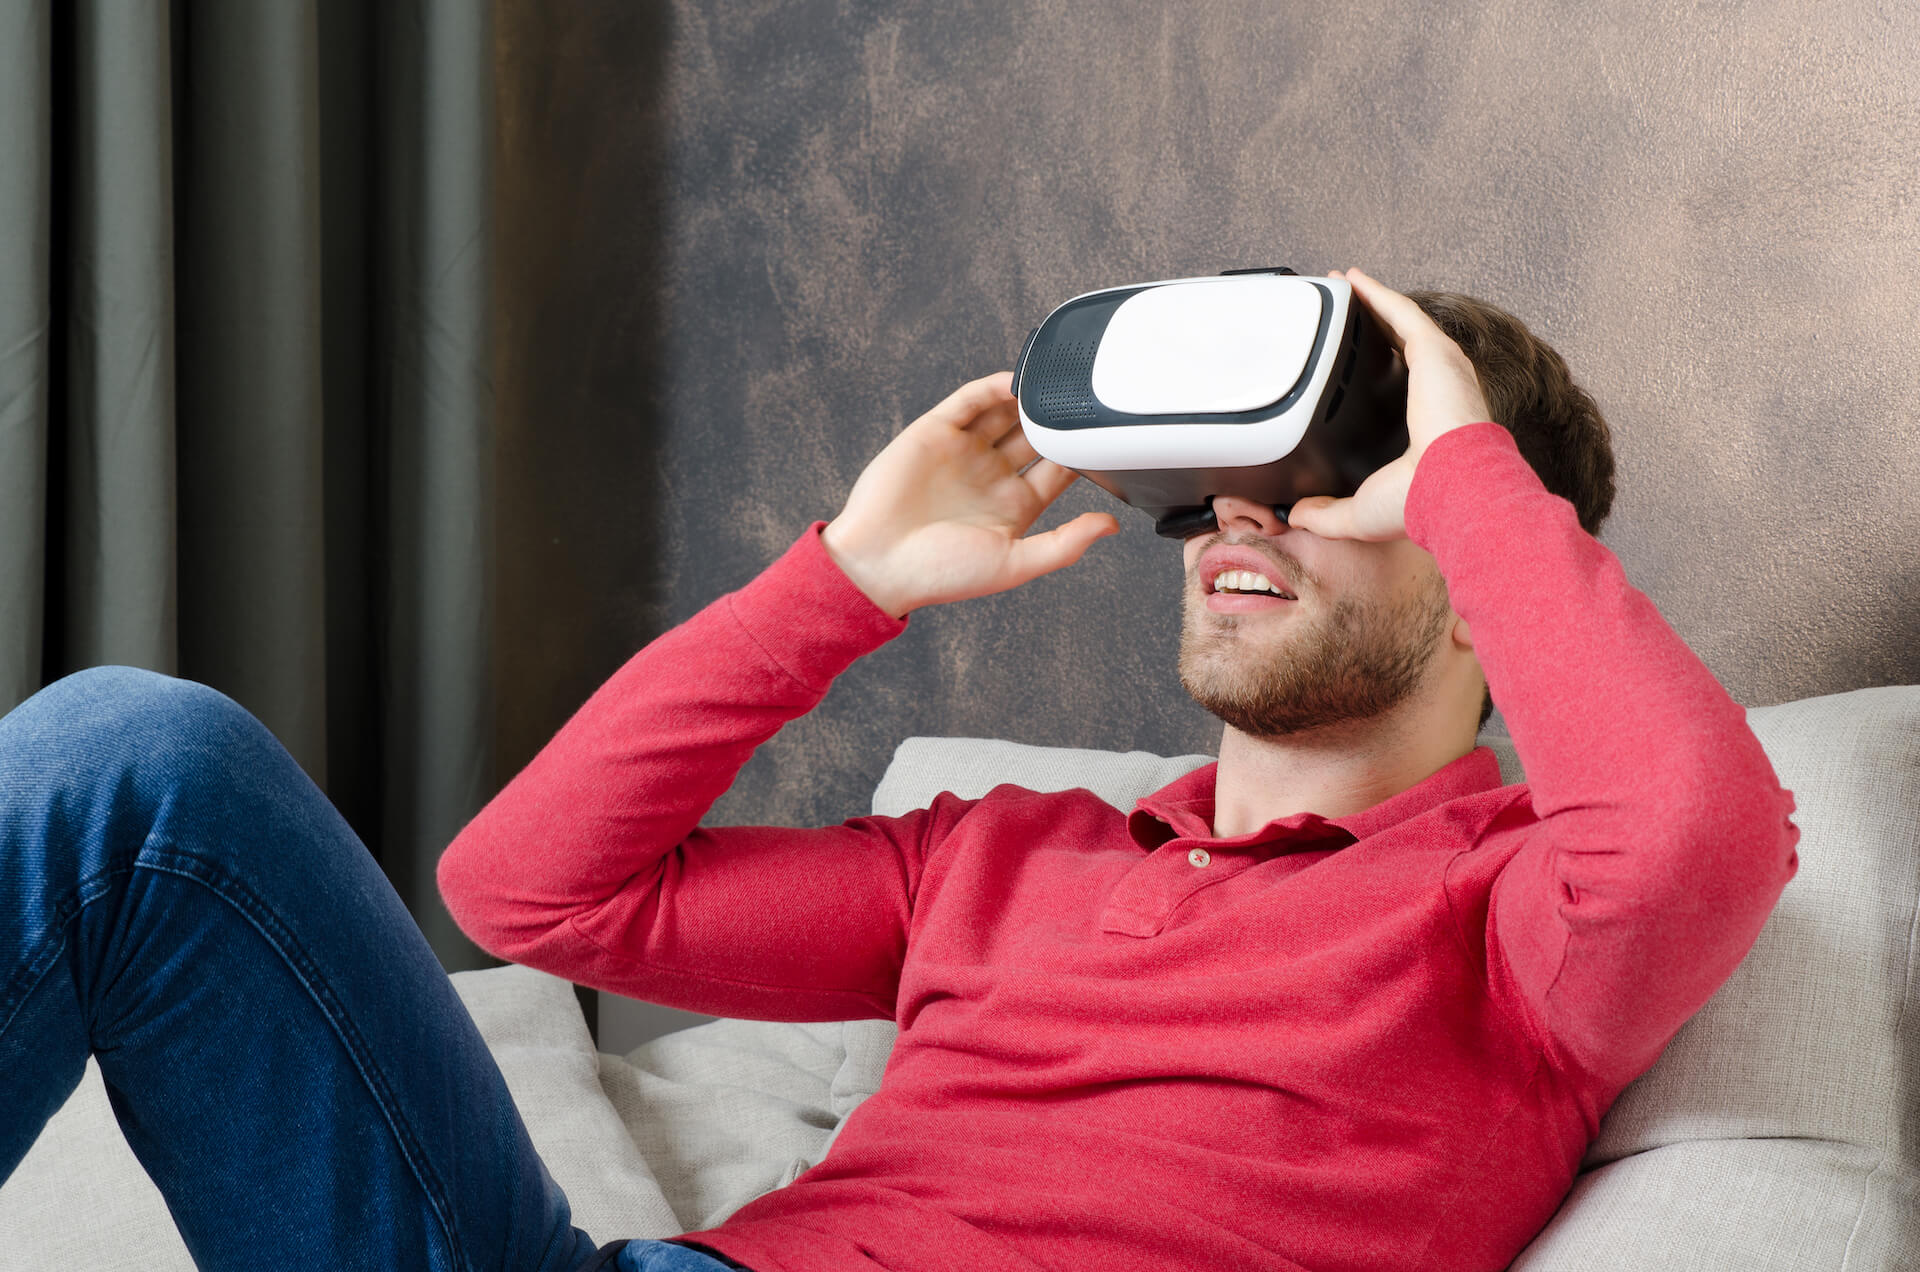 Man Looking at Real Estate for Sale In VR